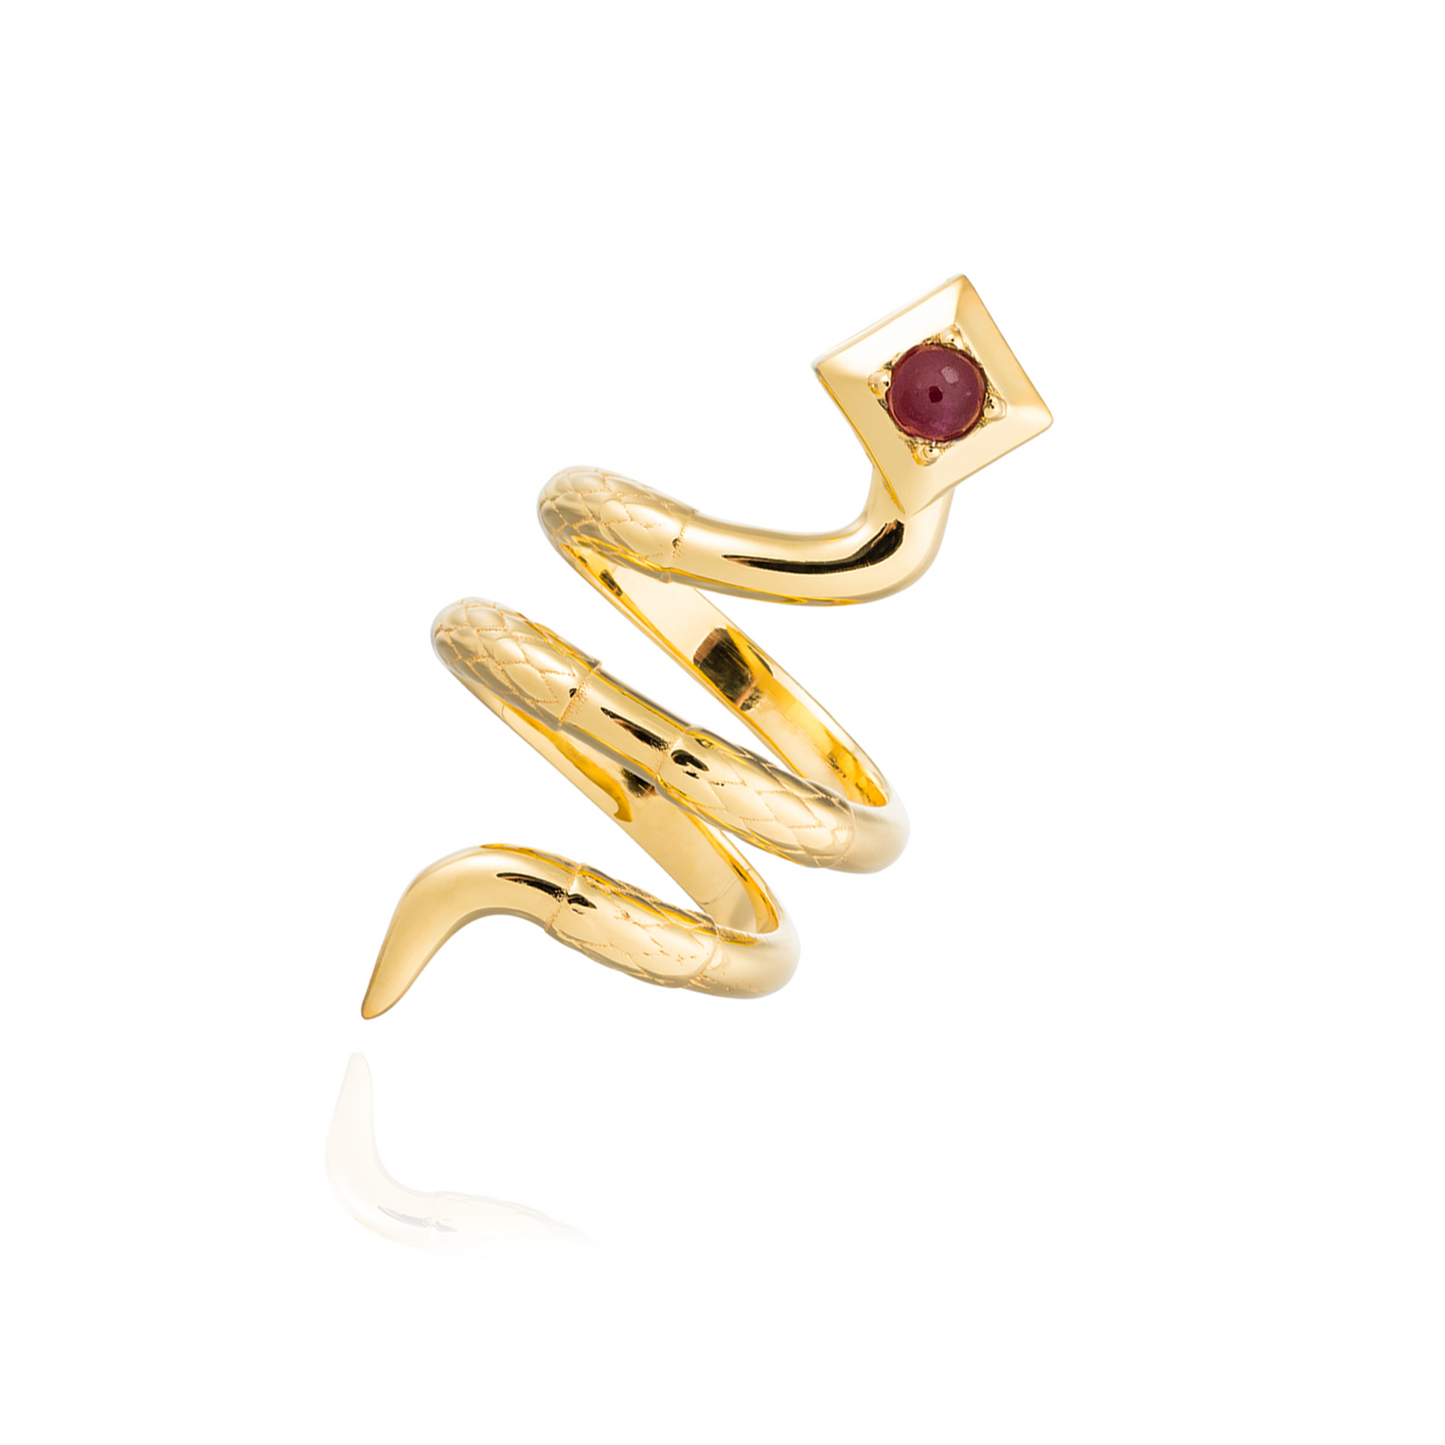 Serpentine 925 Silver Snake Ring with Ruby Cabouchon